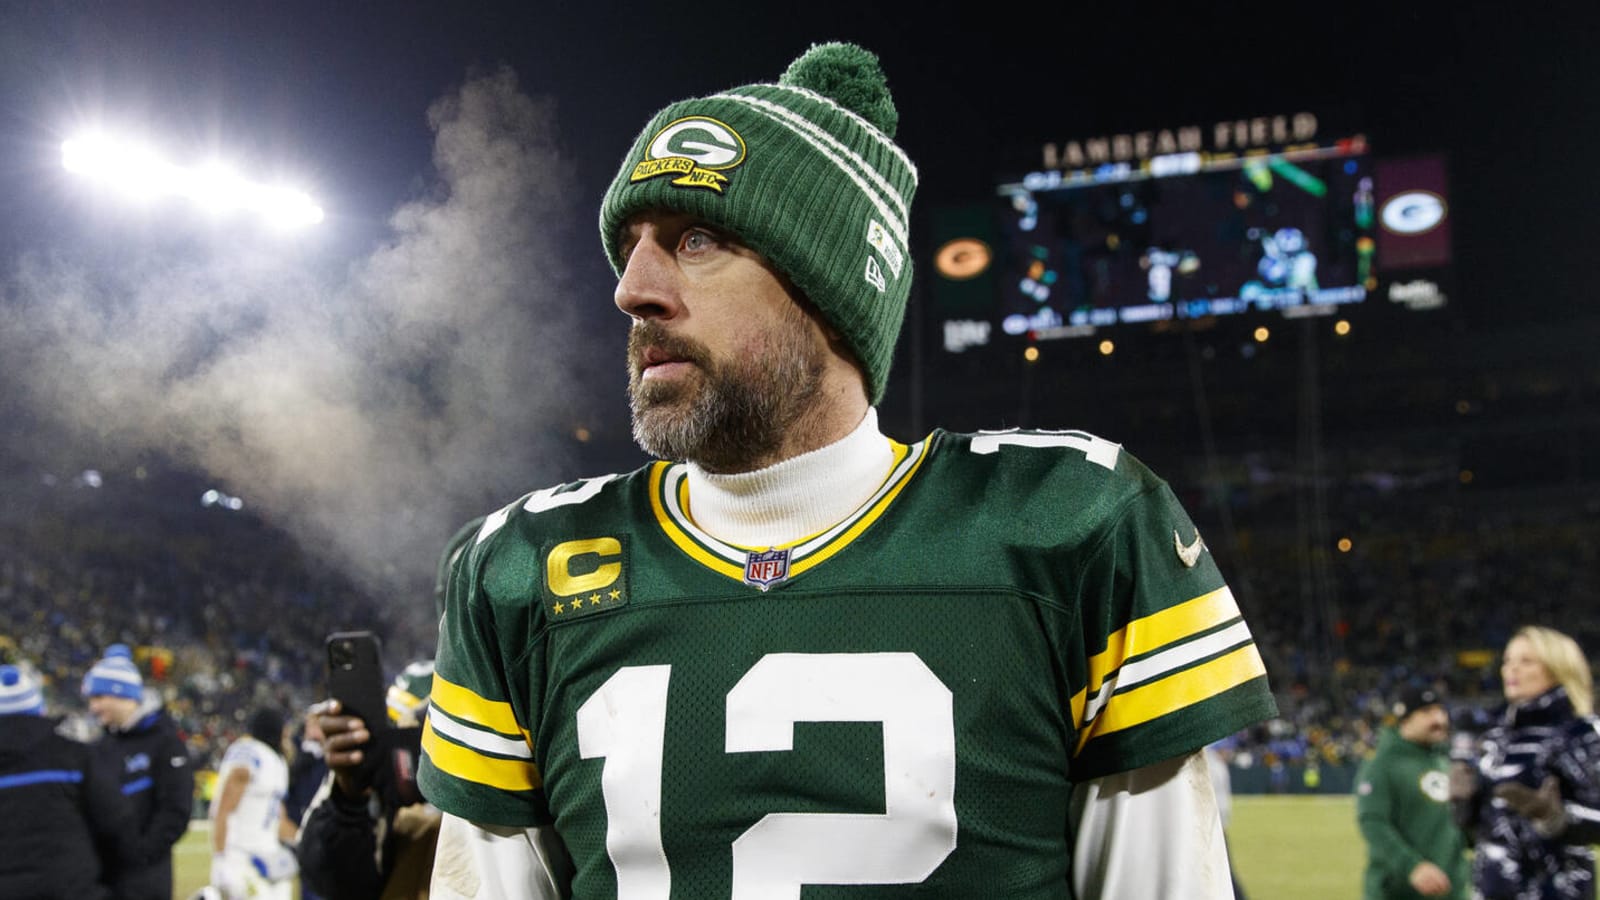 Sports agent makes Aaron Rodgers, Packers prediction